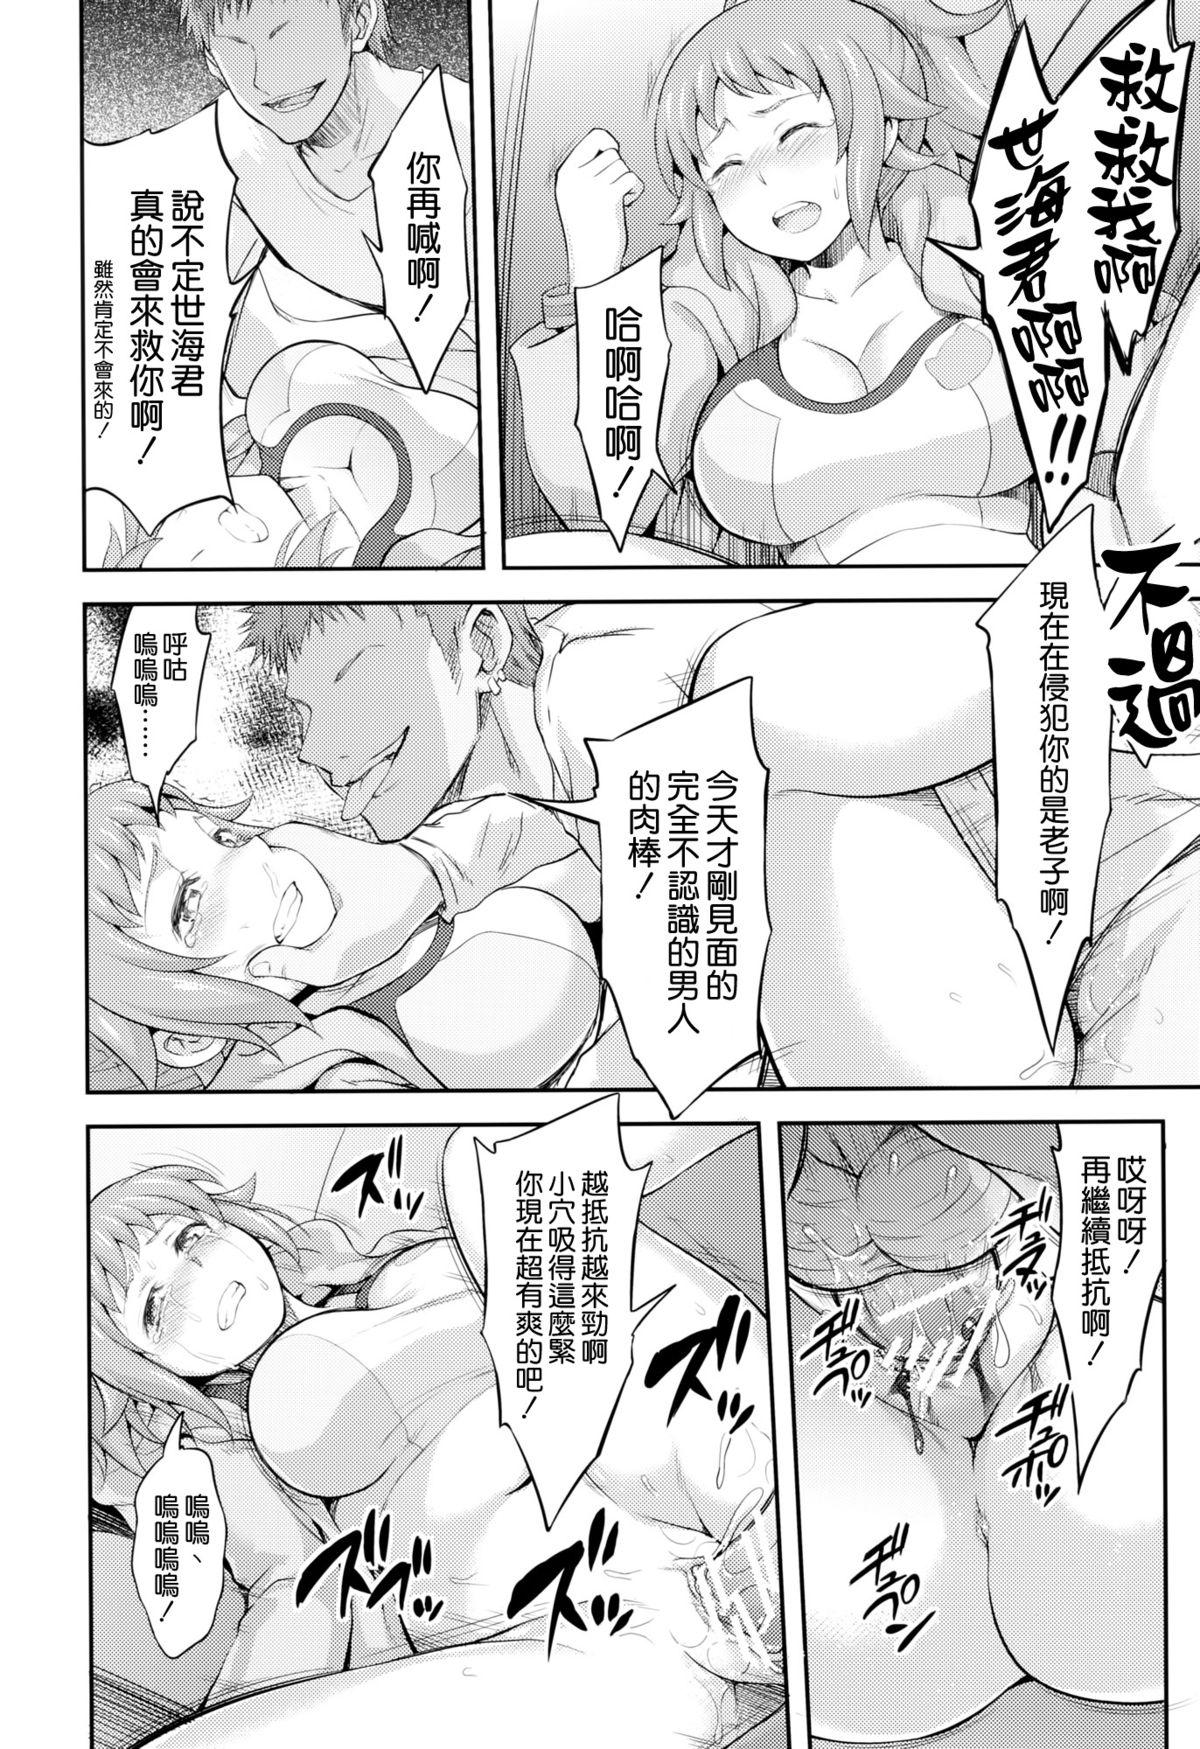 Onlyfans Rachi, Rinkan, Fumina-senpai - Gundam build fighters try Foursome - Page 12